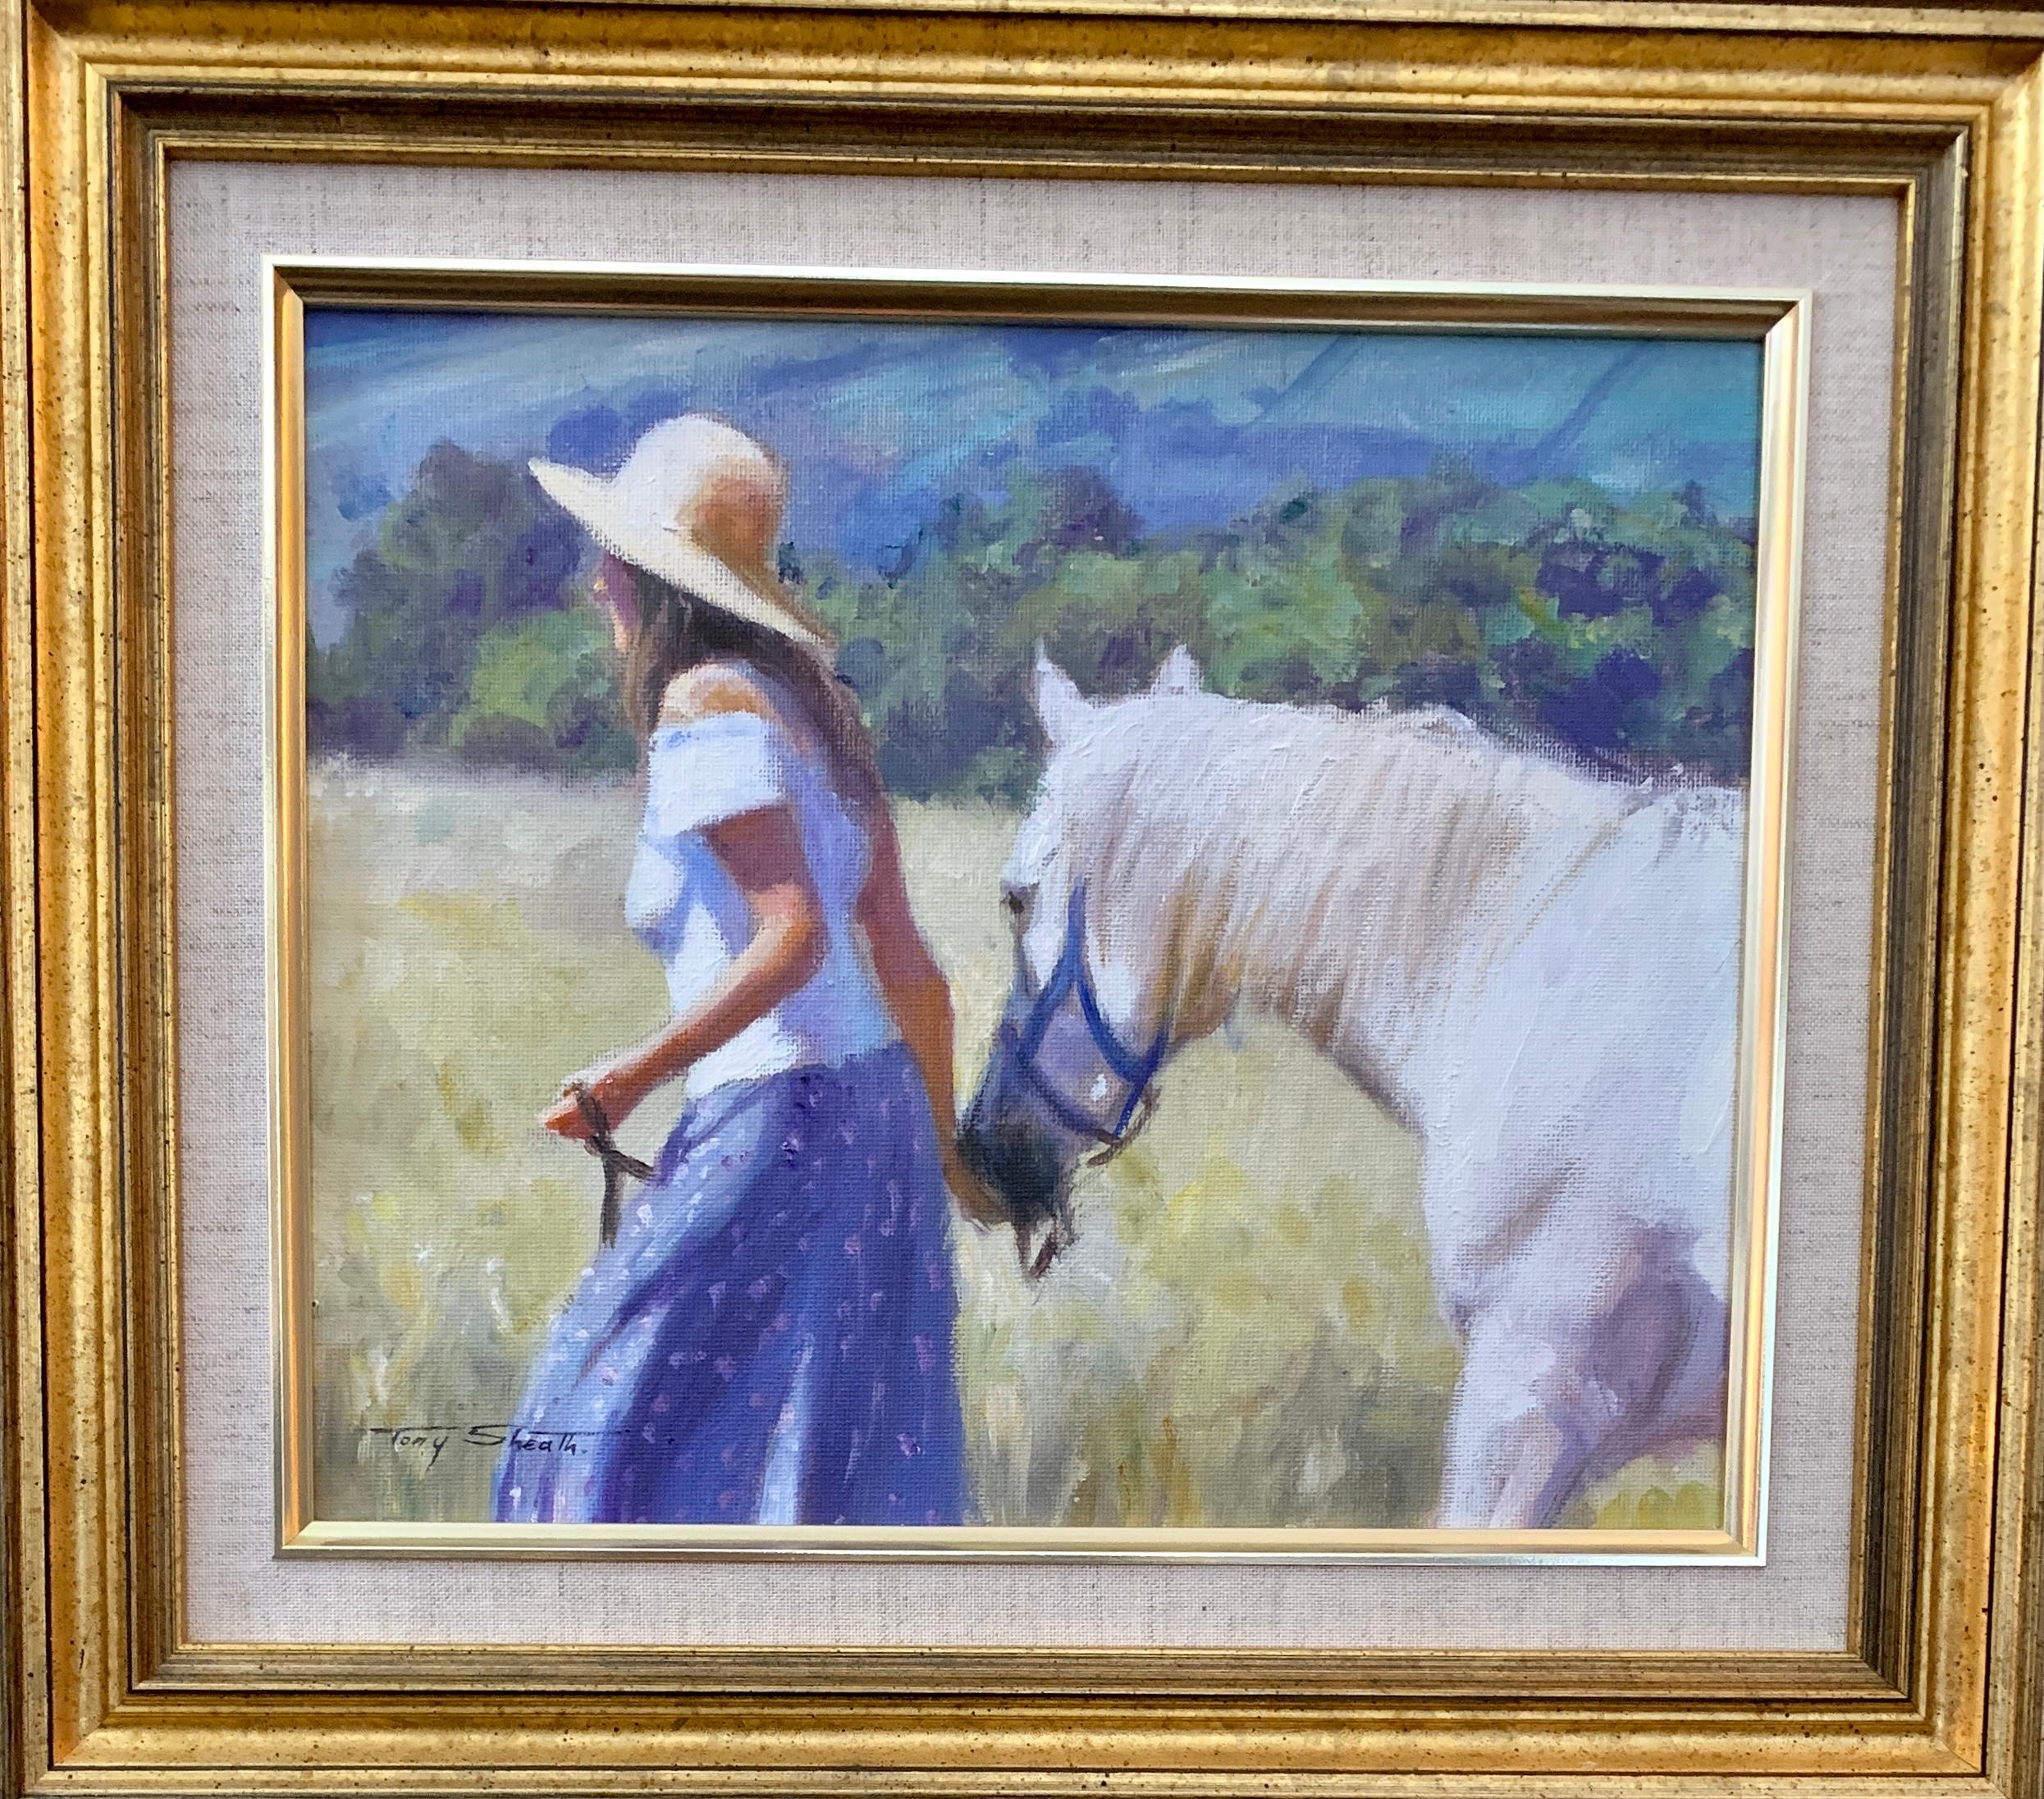 Tony Sheath Animal Painting - Girl with her horse in an Impressionist landscape in an English Summer